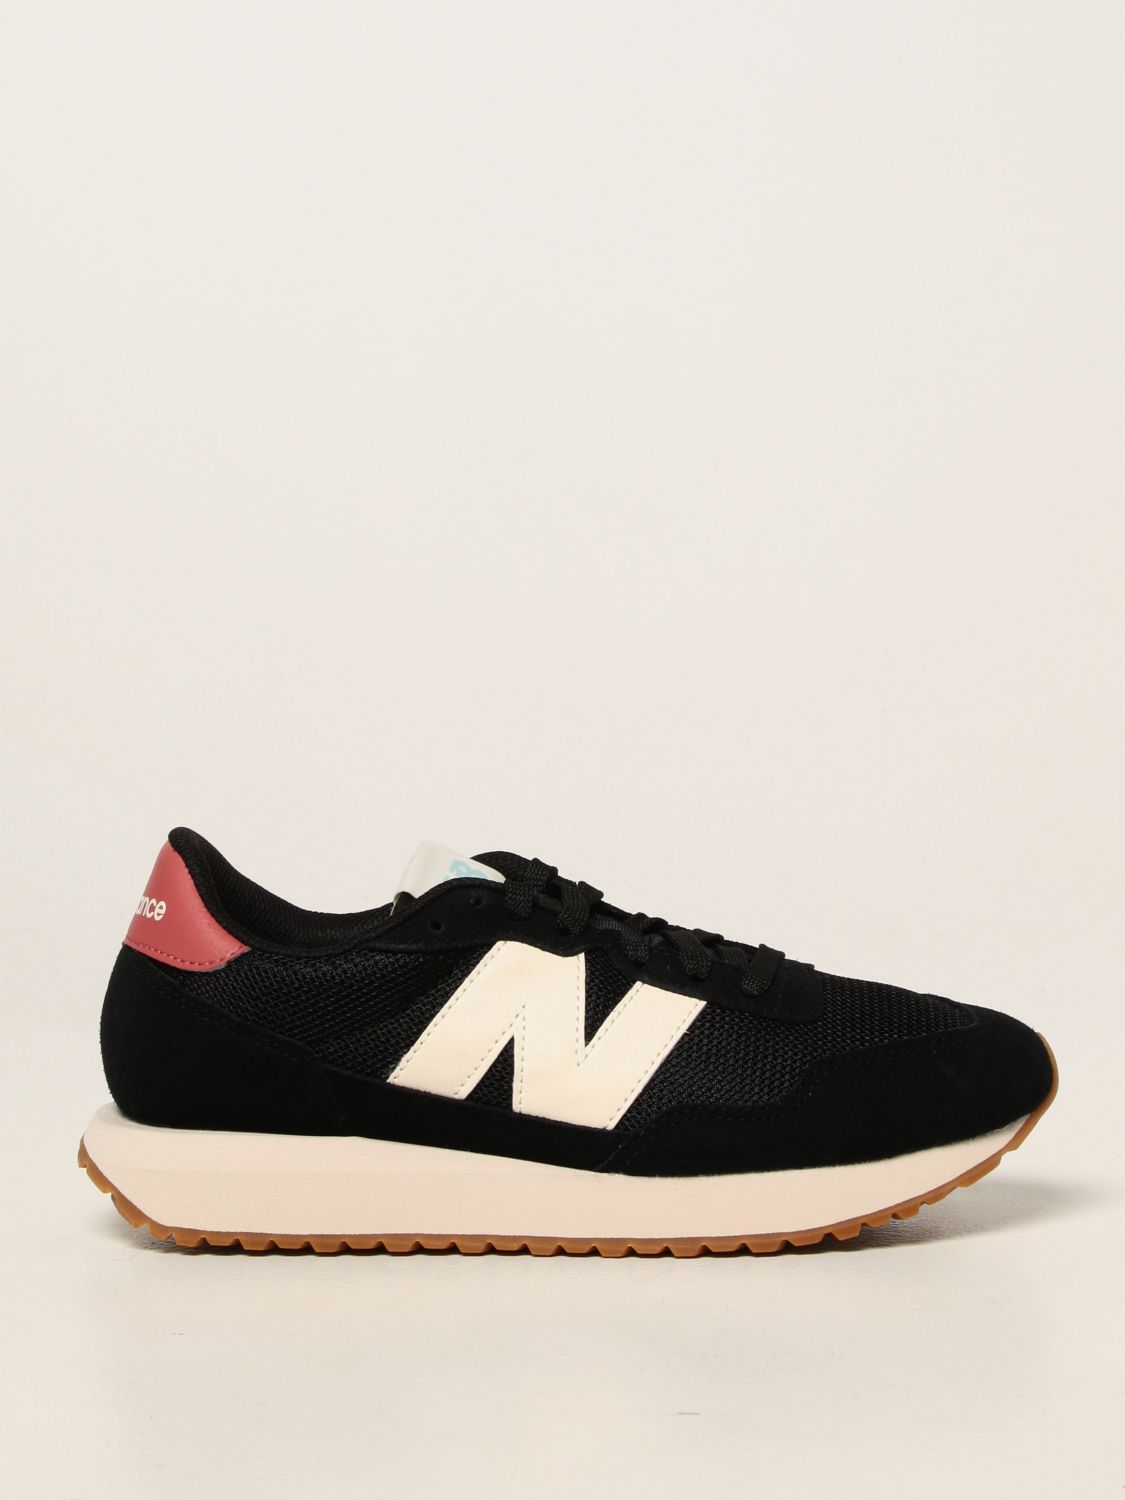 WS237HR1 New Balance sneakers in suede and mesh